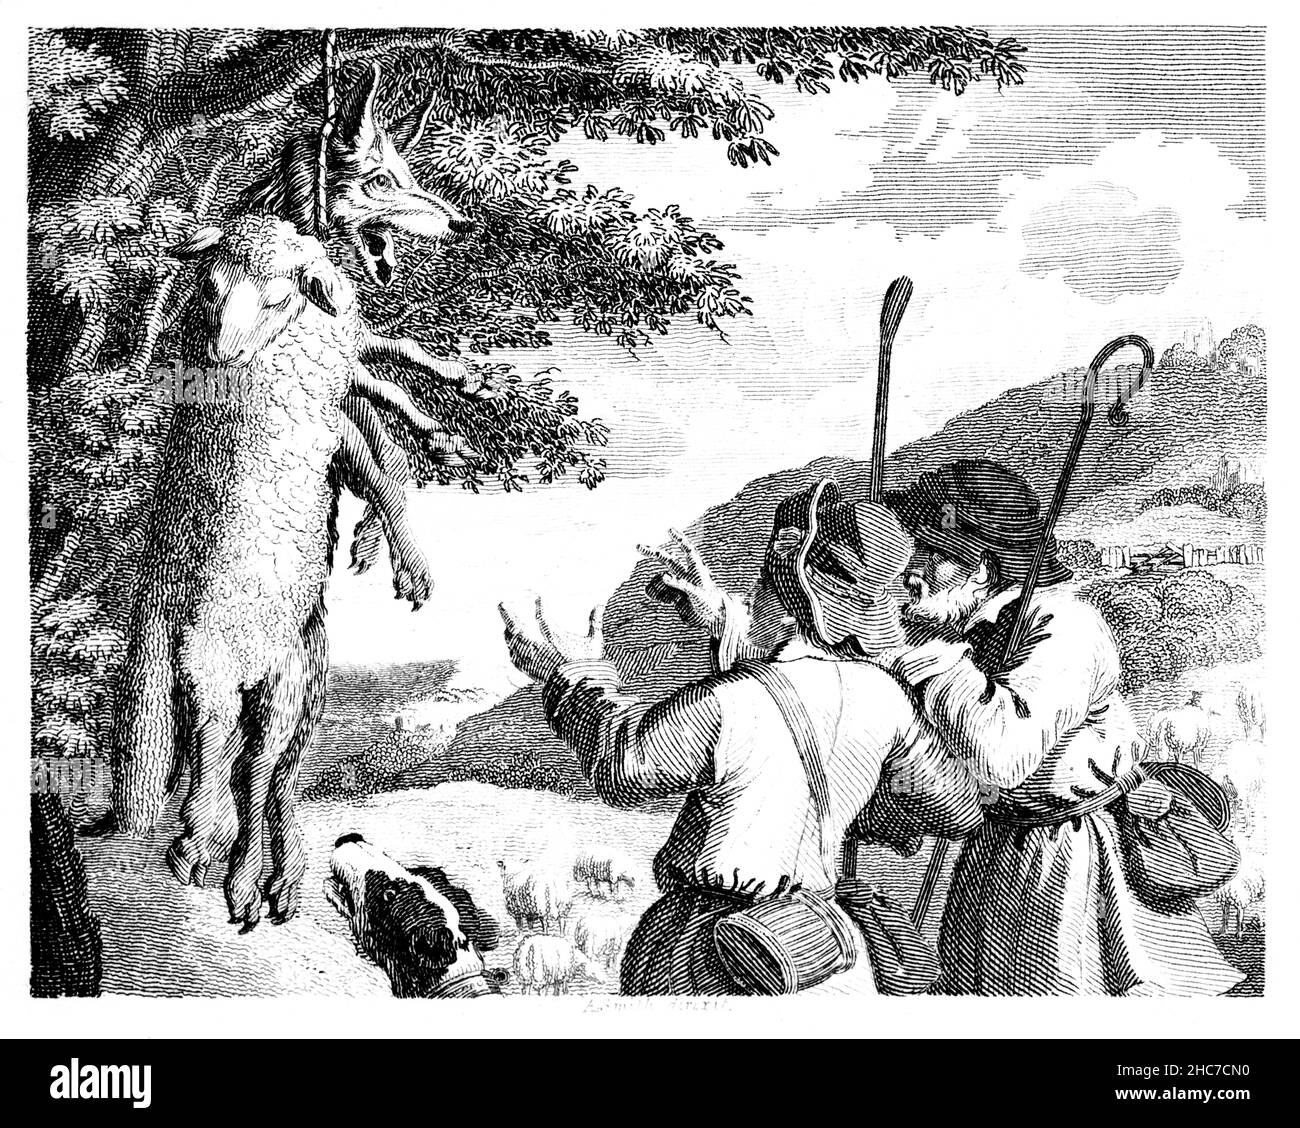 engraved illustration of The Wolf in Sheep’s clothing, a tale of playing a role contrary to real character, from 1793 First Edition of Stockdale’s Aes Stock Photo